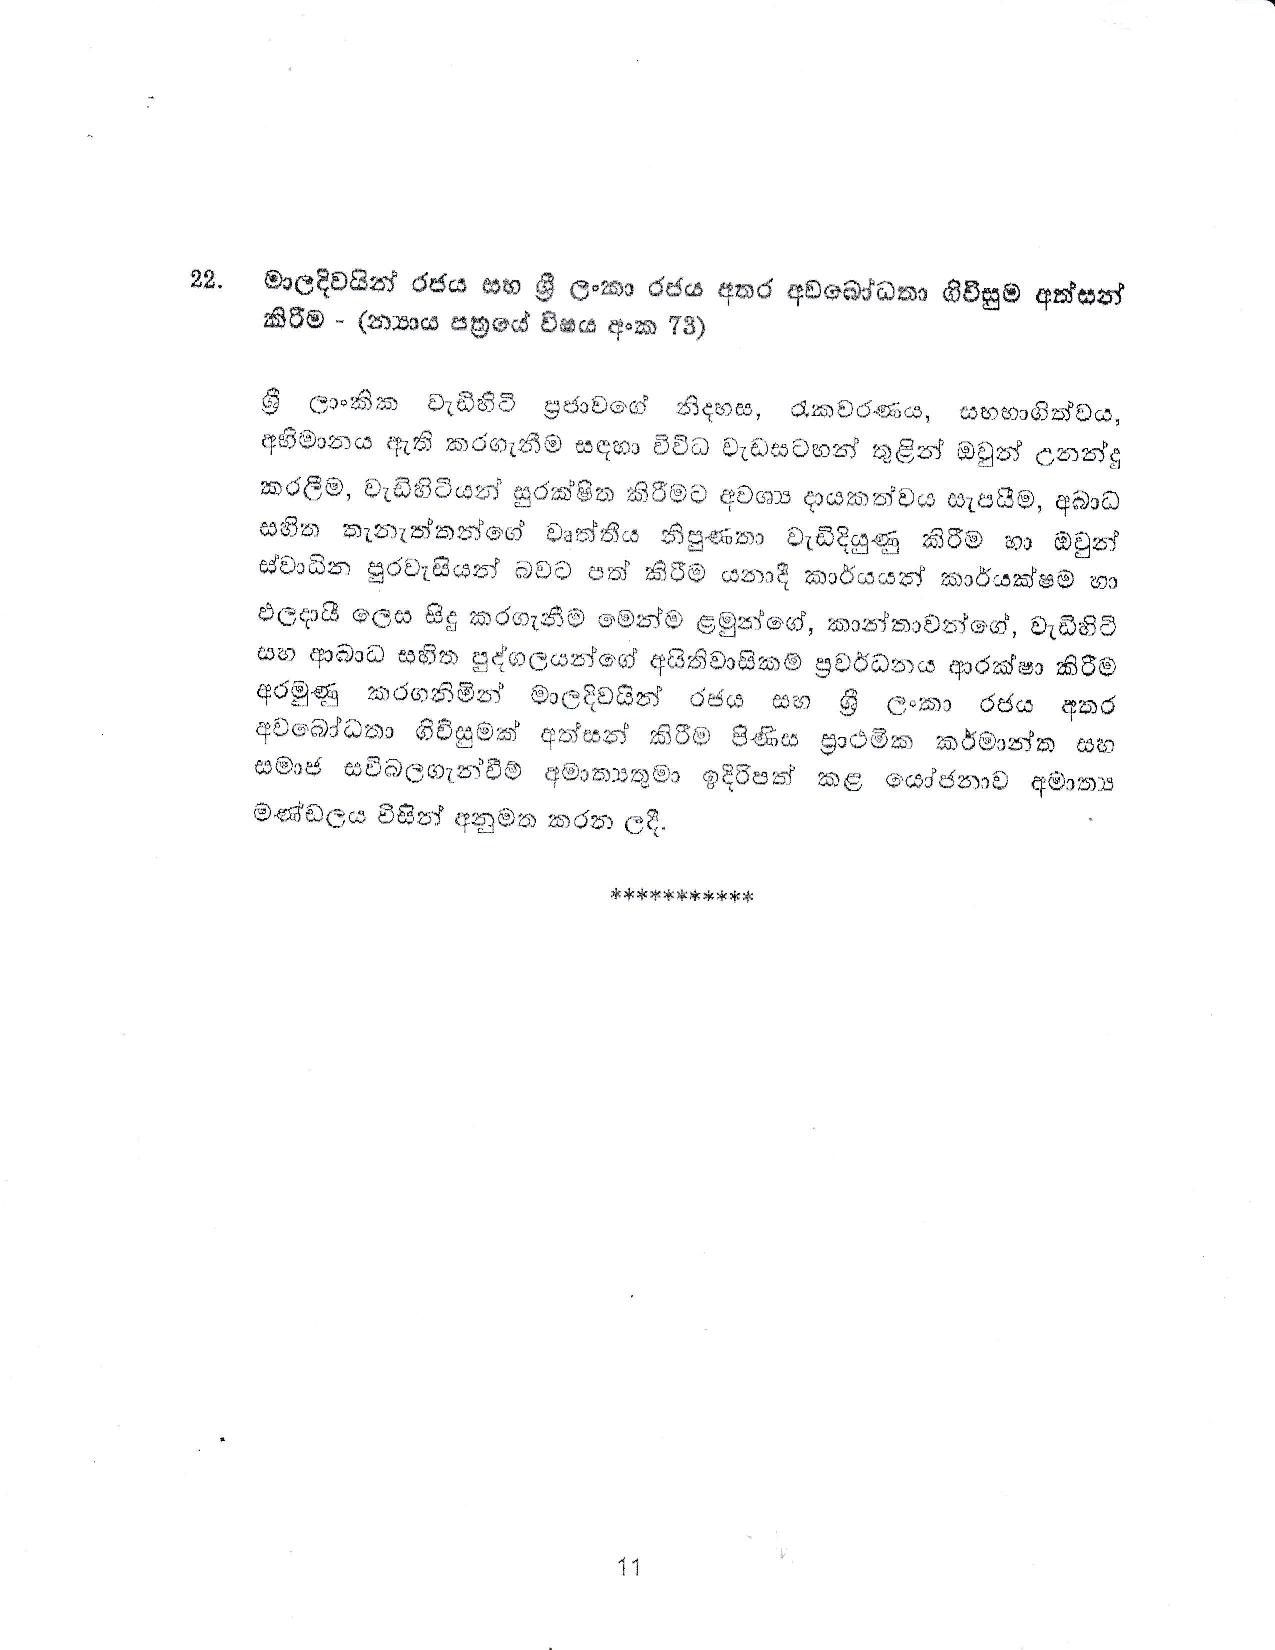 Cabinet Decision 27.08.2019 page 011